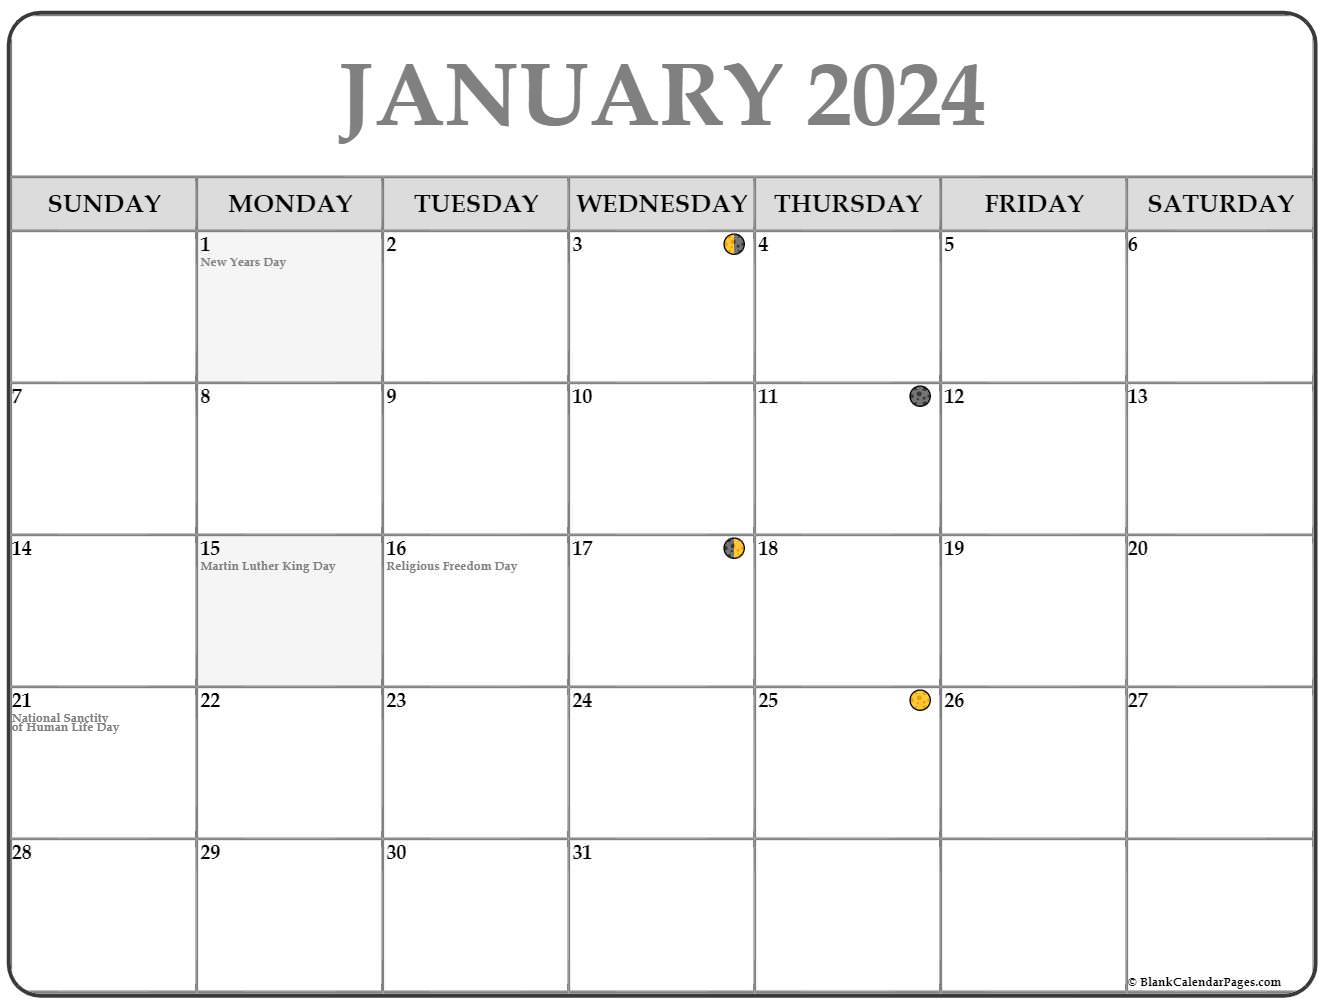 Lunar Calendar Day Today 2024 Cool Top The Best Review of February